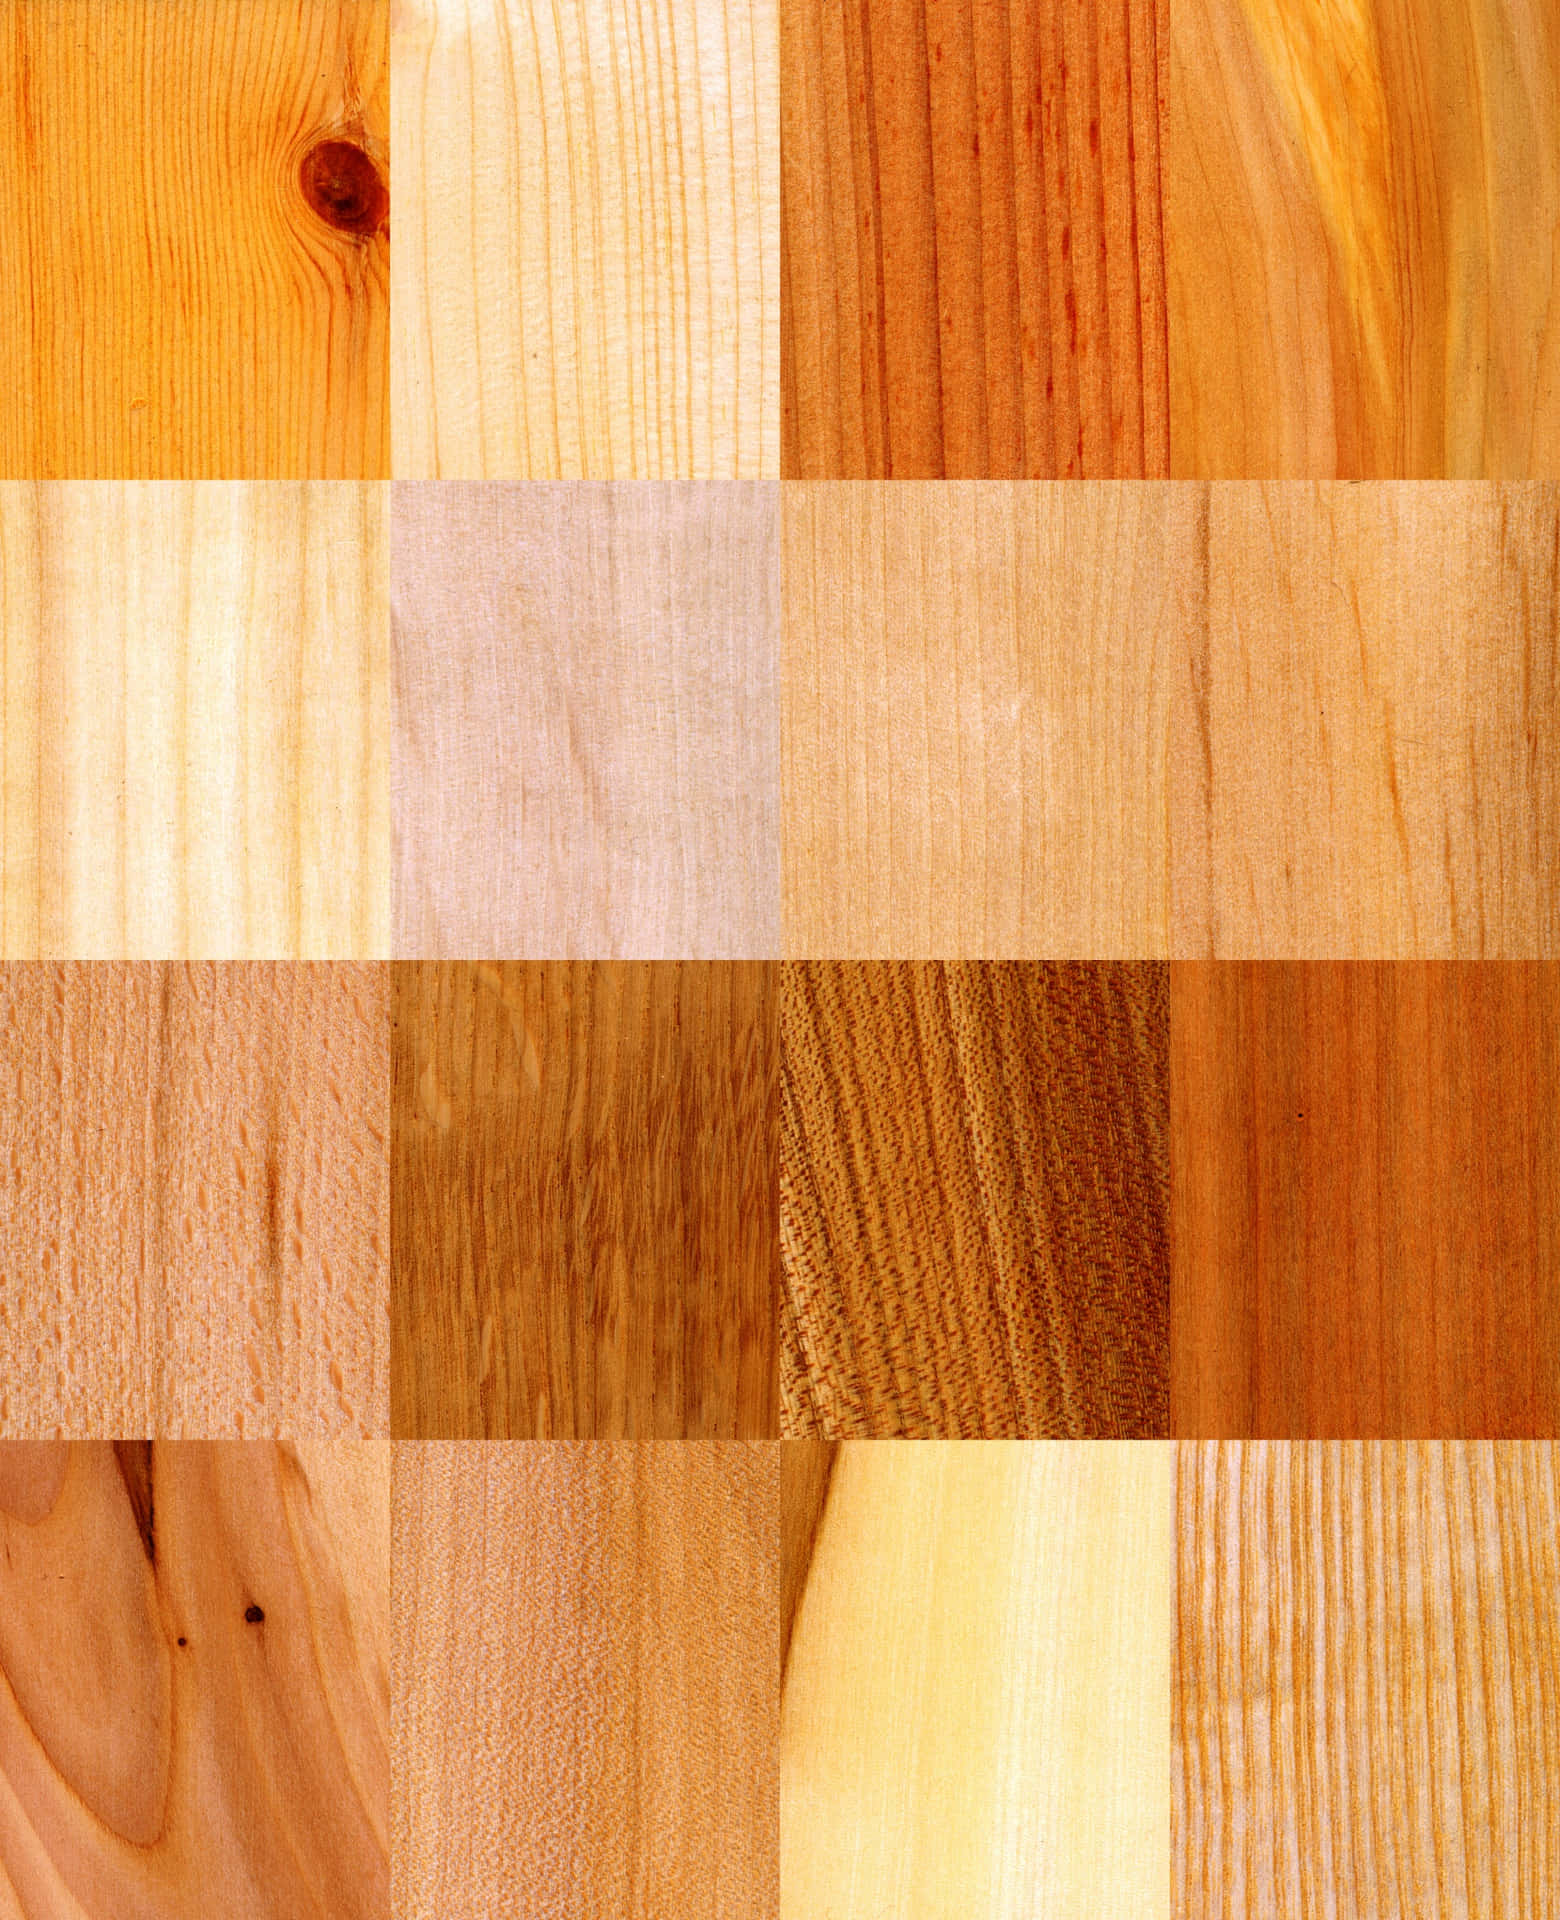 A Close Up Of A Variety Of Woods